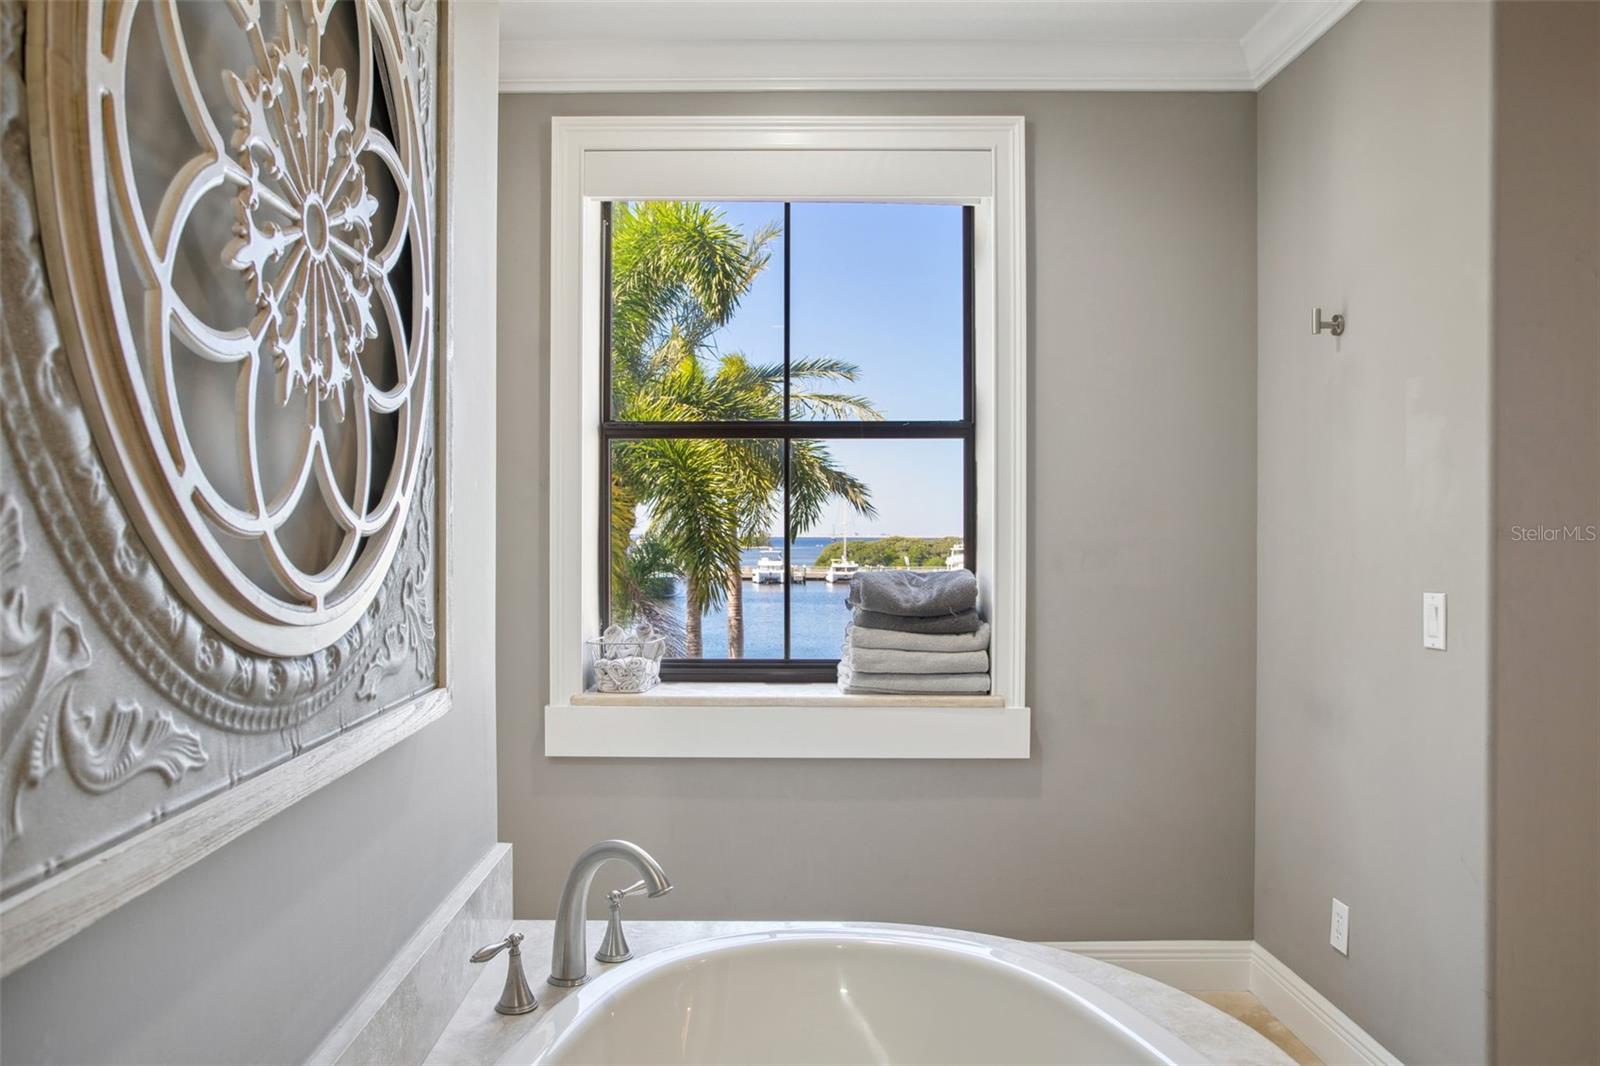 Master bath Jacuzzi tub with views of the sunset.